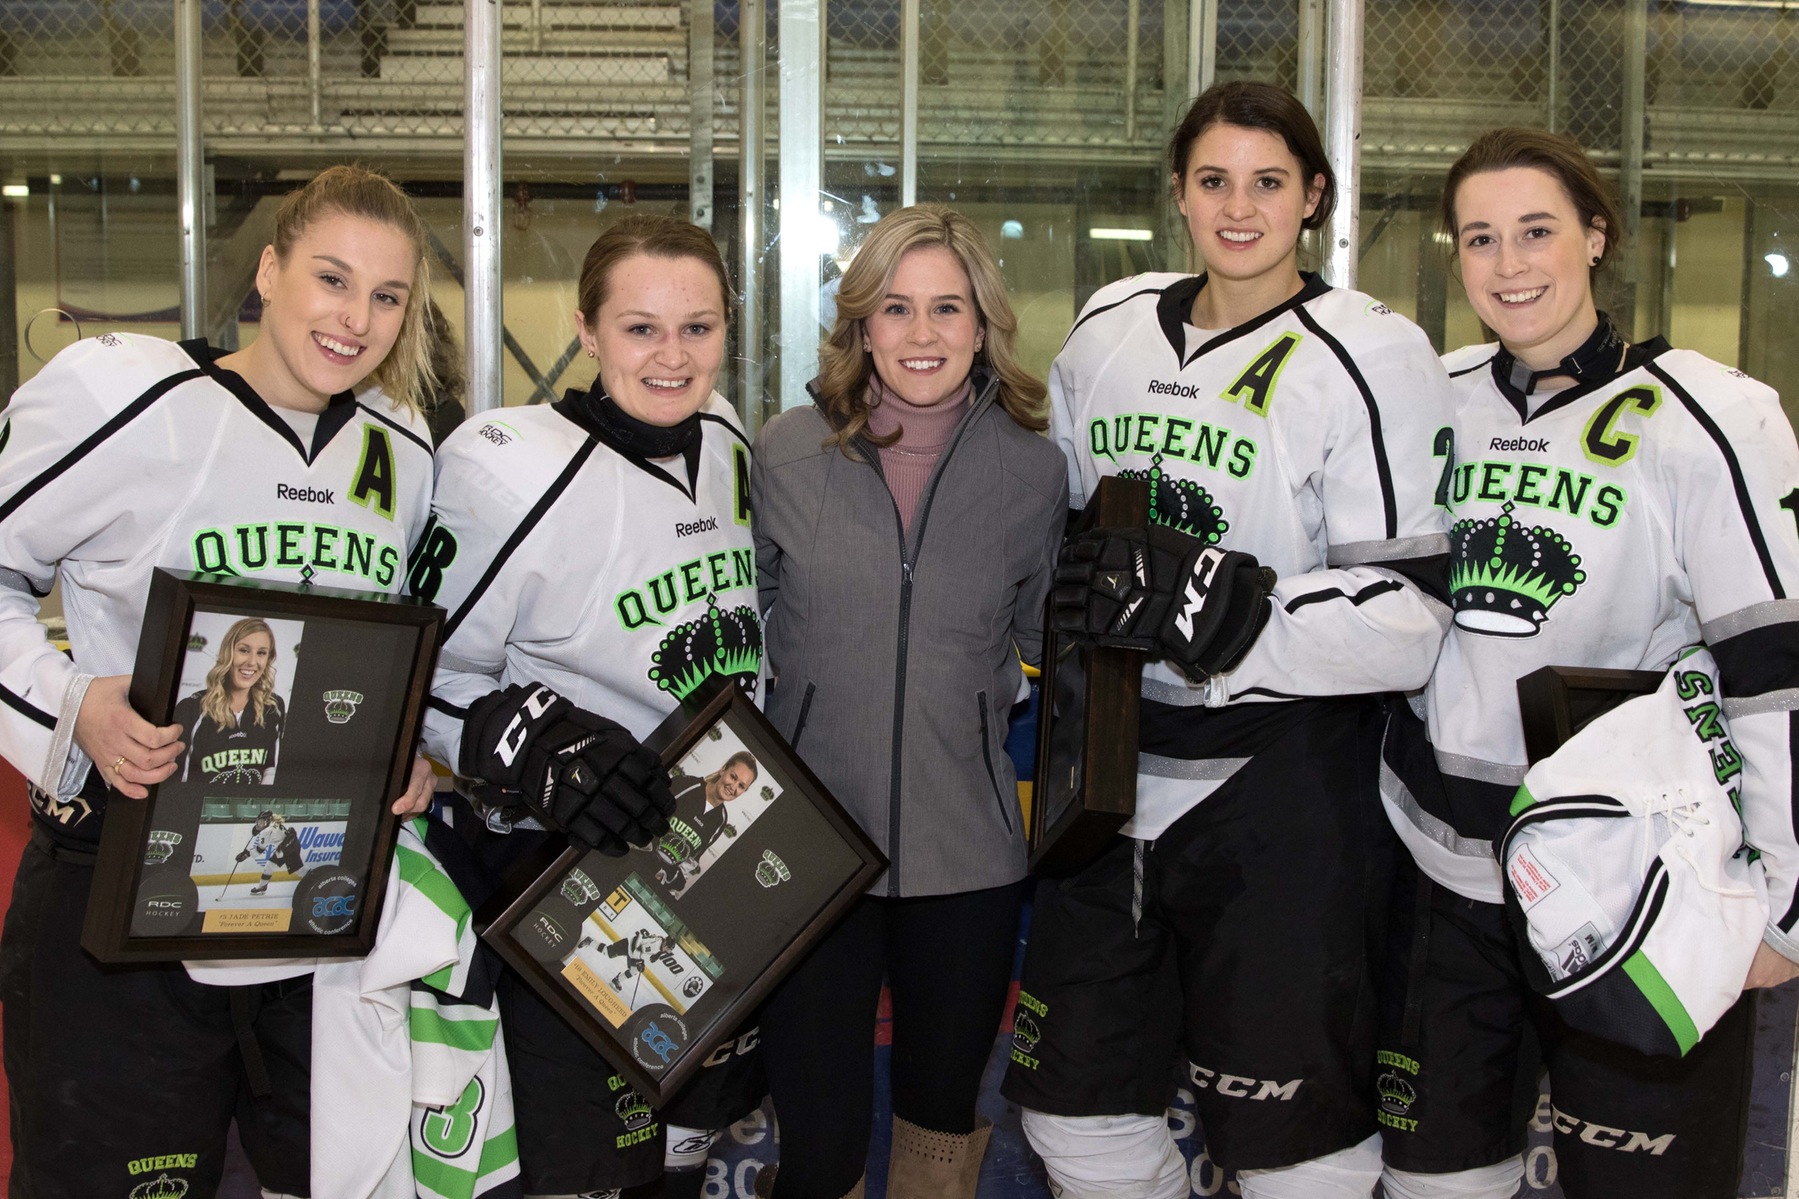 Graduating Queens from left-to-right: Jade Petrie (3), Emily Lougheed (18), Suze Vanderlinde (Assistant Coach and former Queens forward), Cassidy Anderson (2) and Julia Murrell (16)  Photo - Tony Hansen